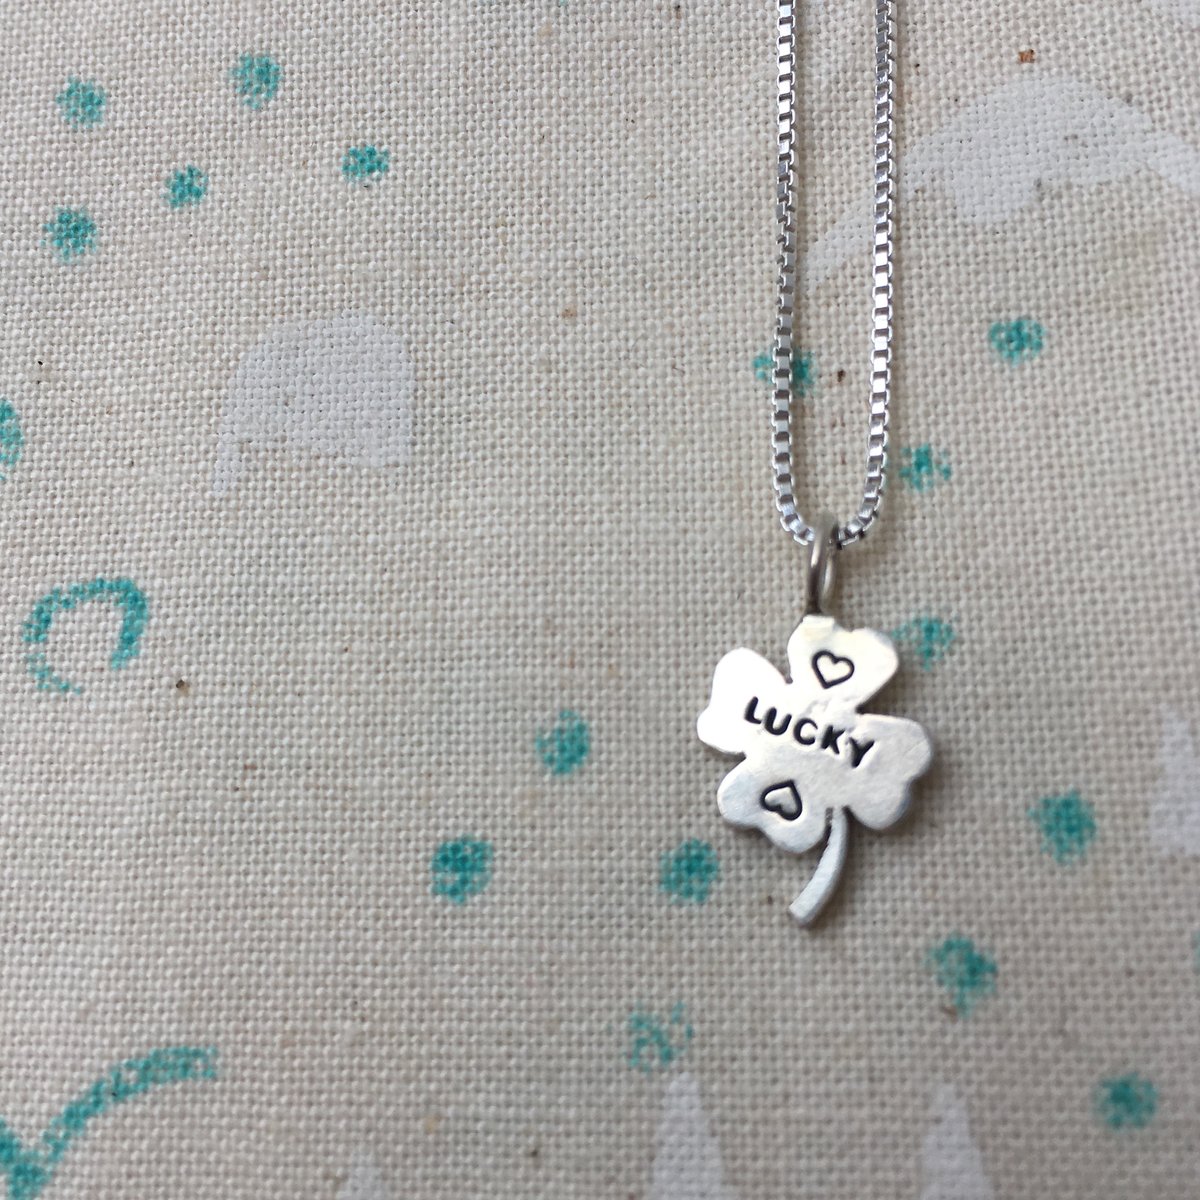 Image of lucky clover necklace